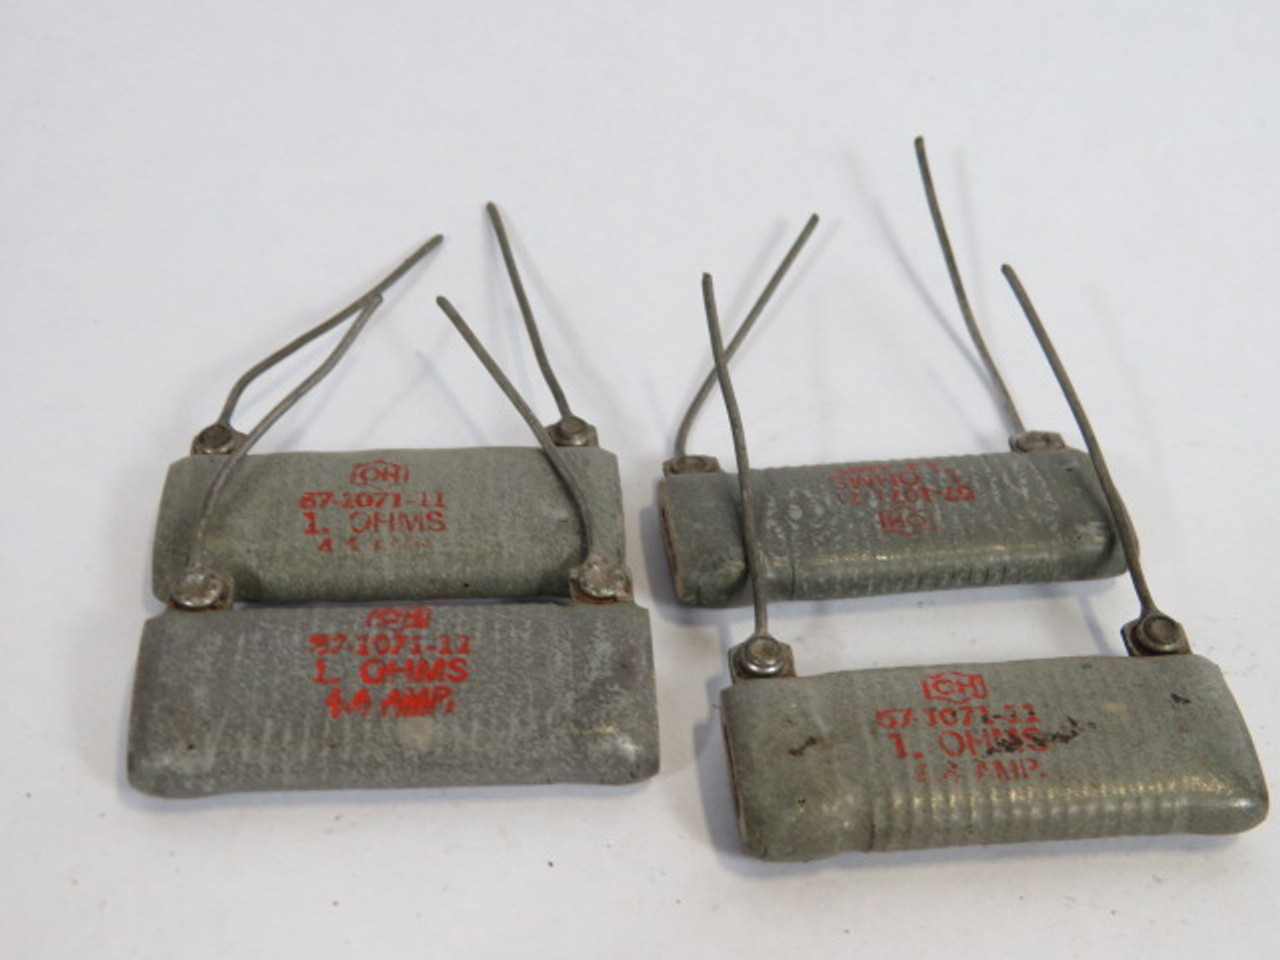 Cutler-Hammer 57-1071-11 Ceramic Capacitor 1 Ohms 4.4A Lot of 4 USED